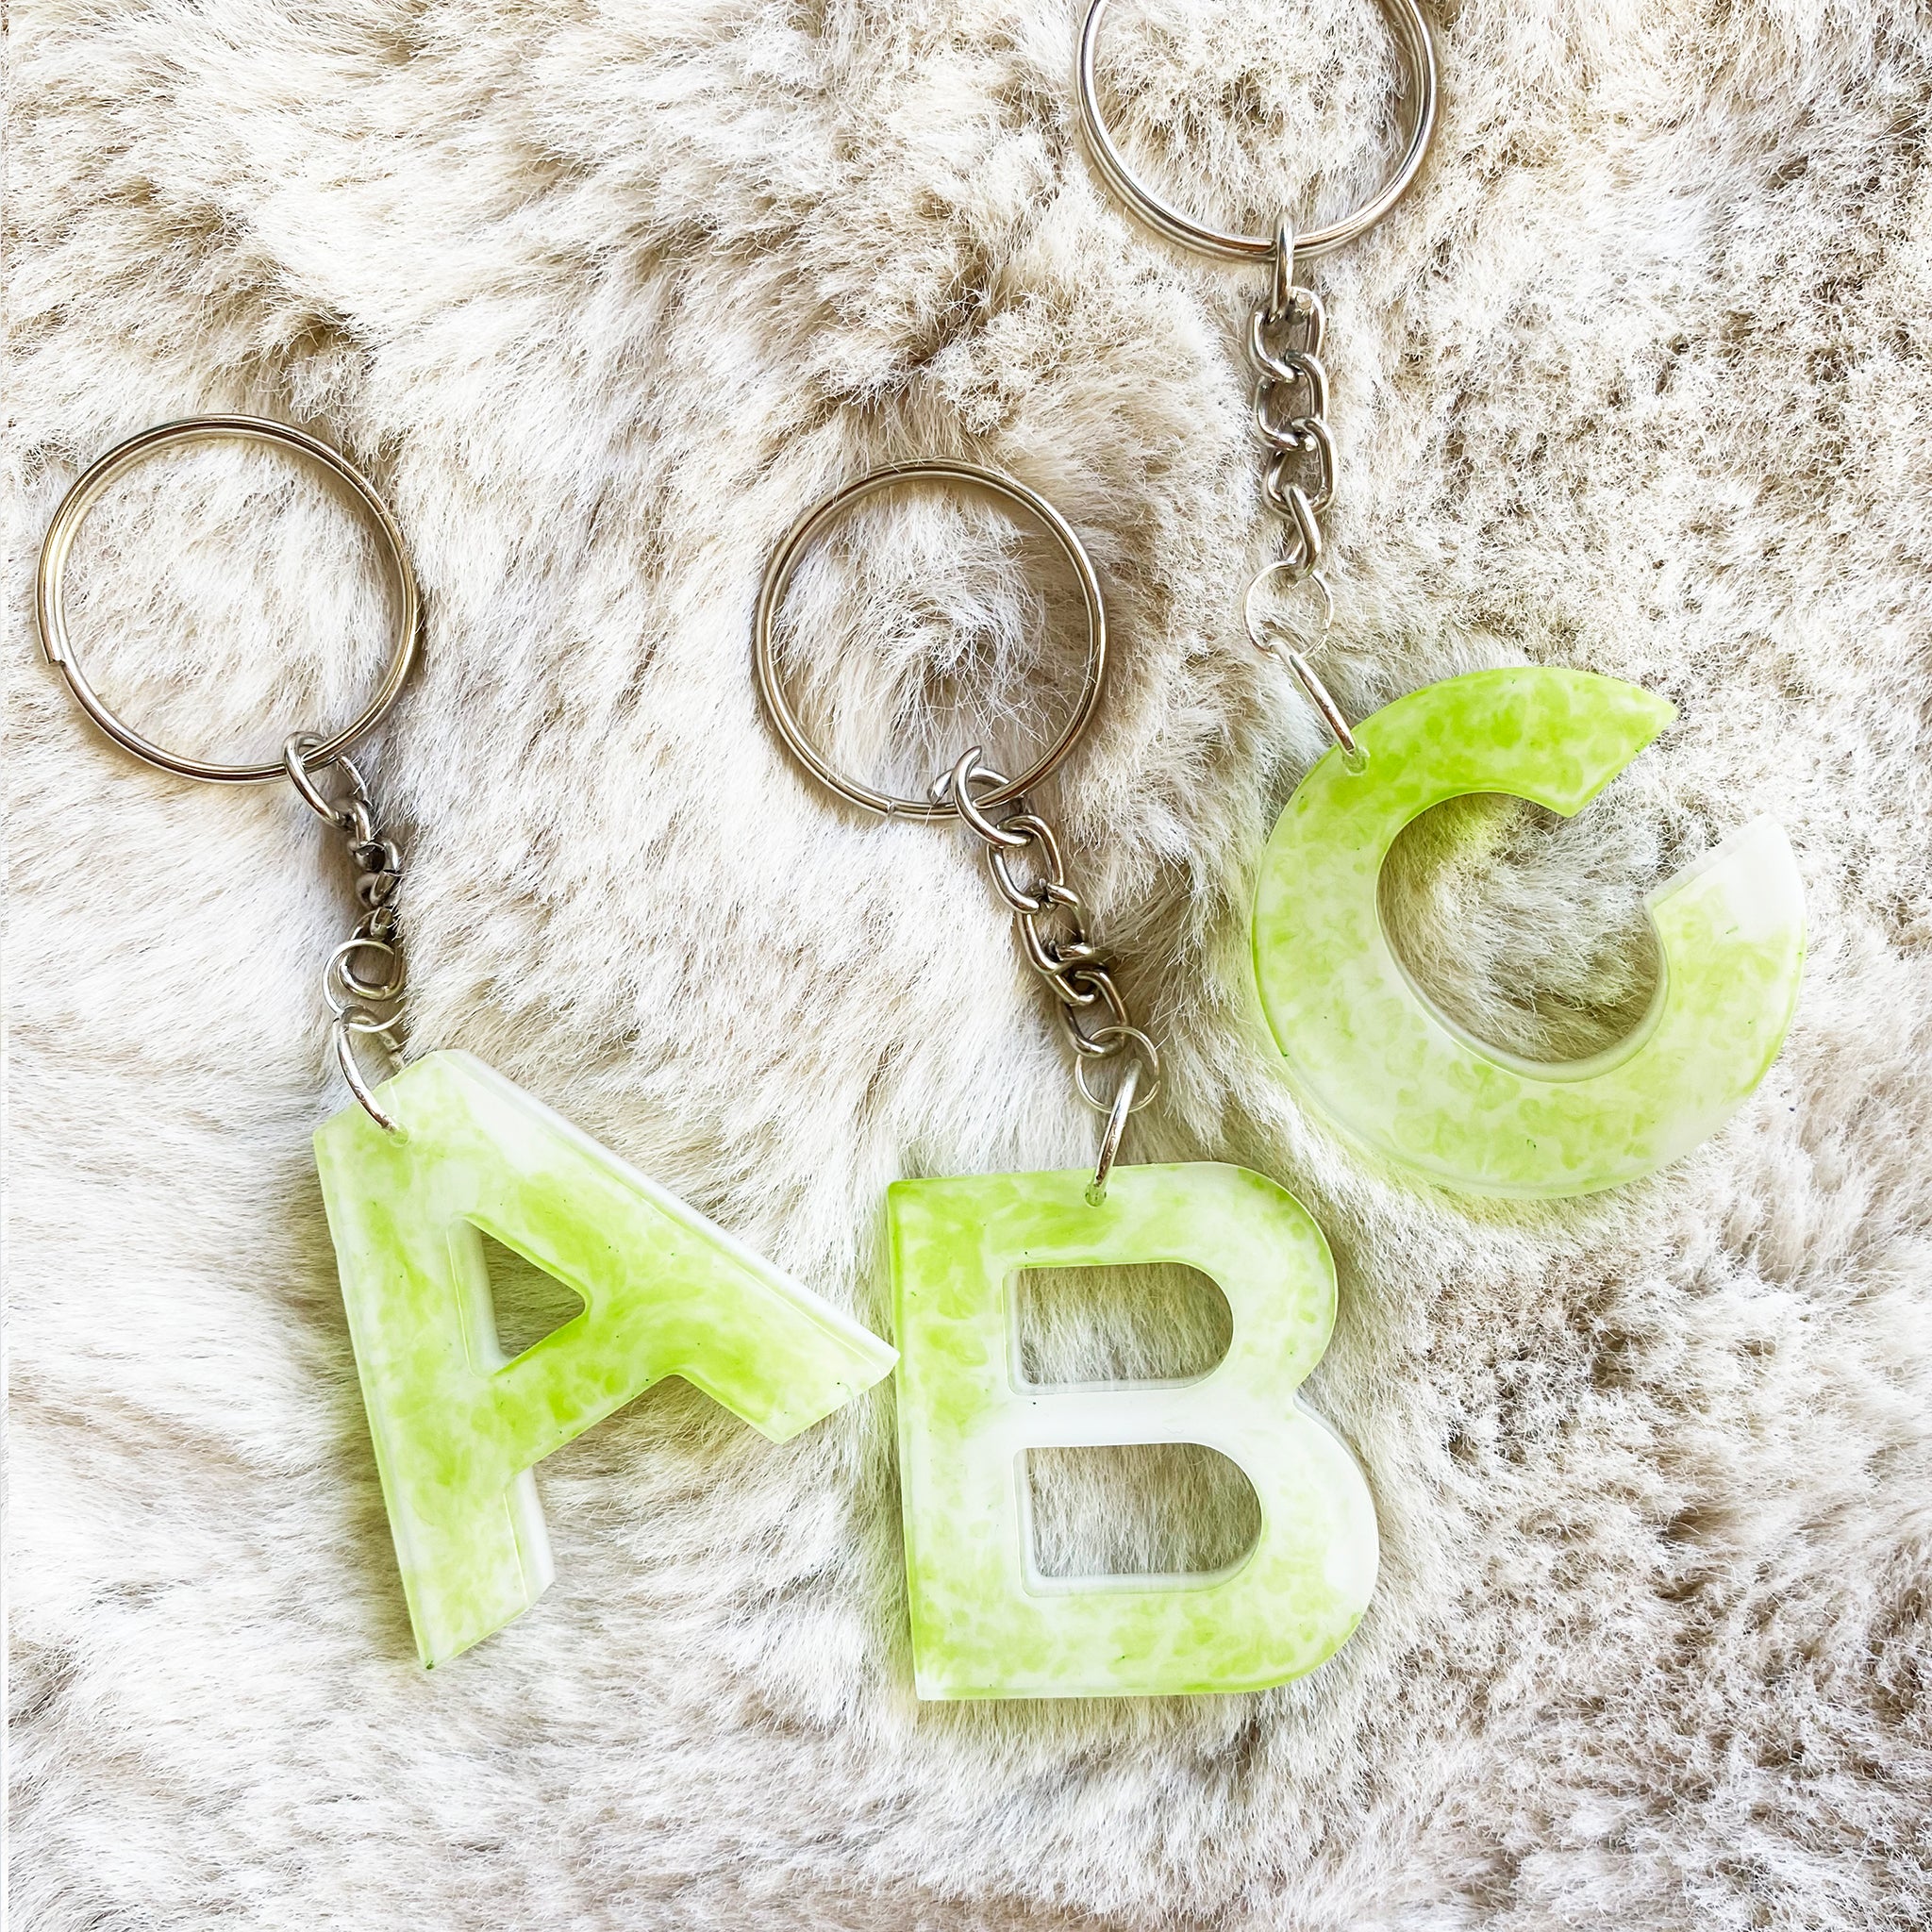 A-Z Resin Keychains - The Style Salad